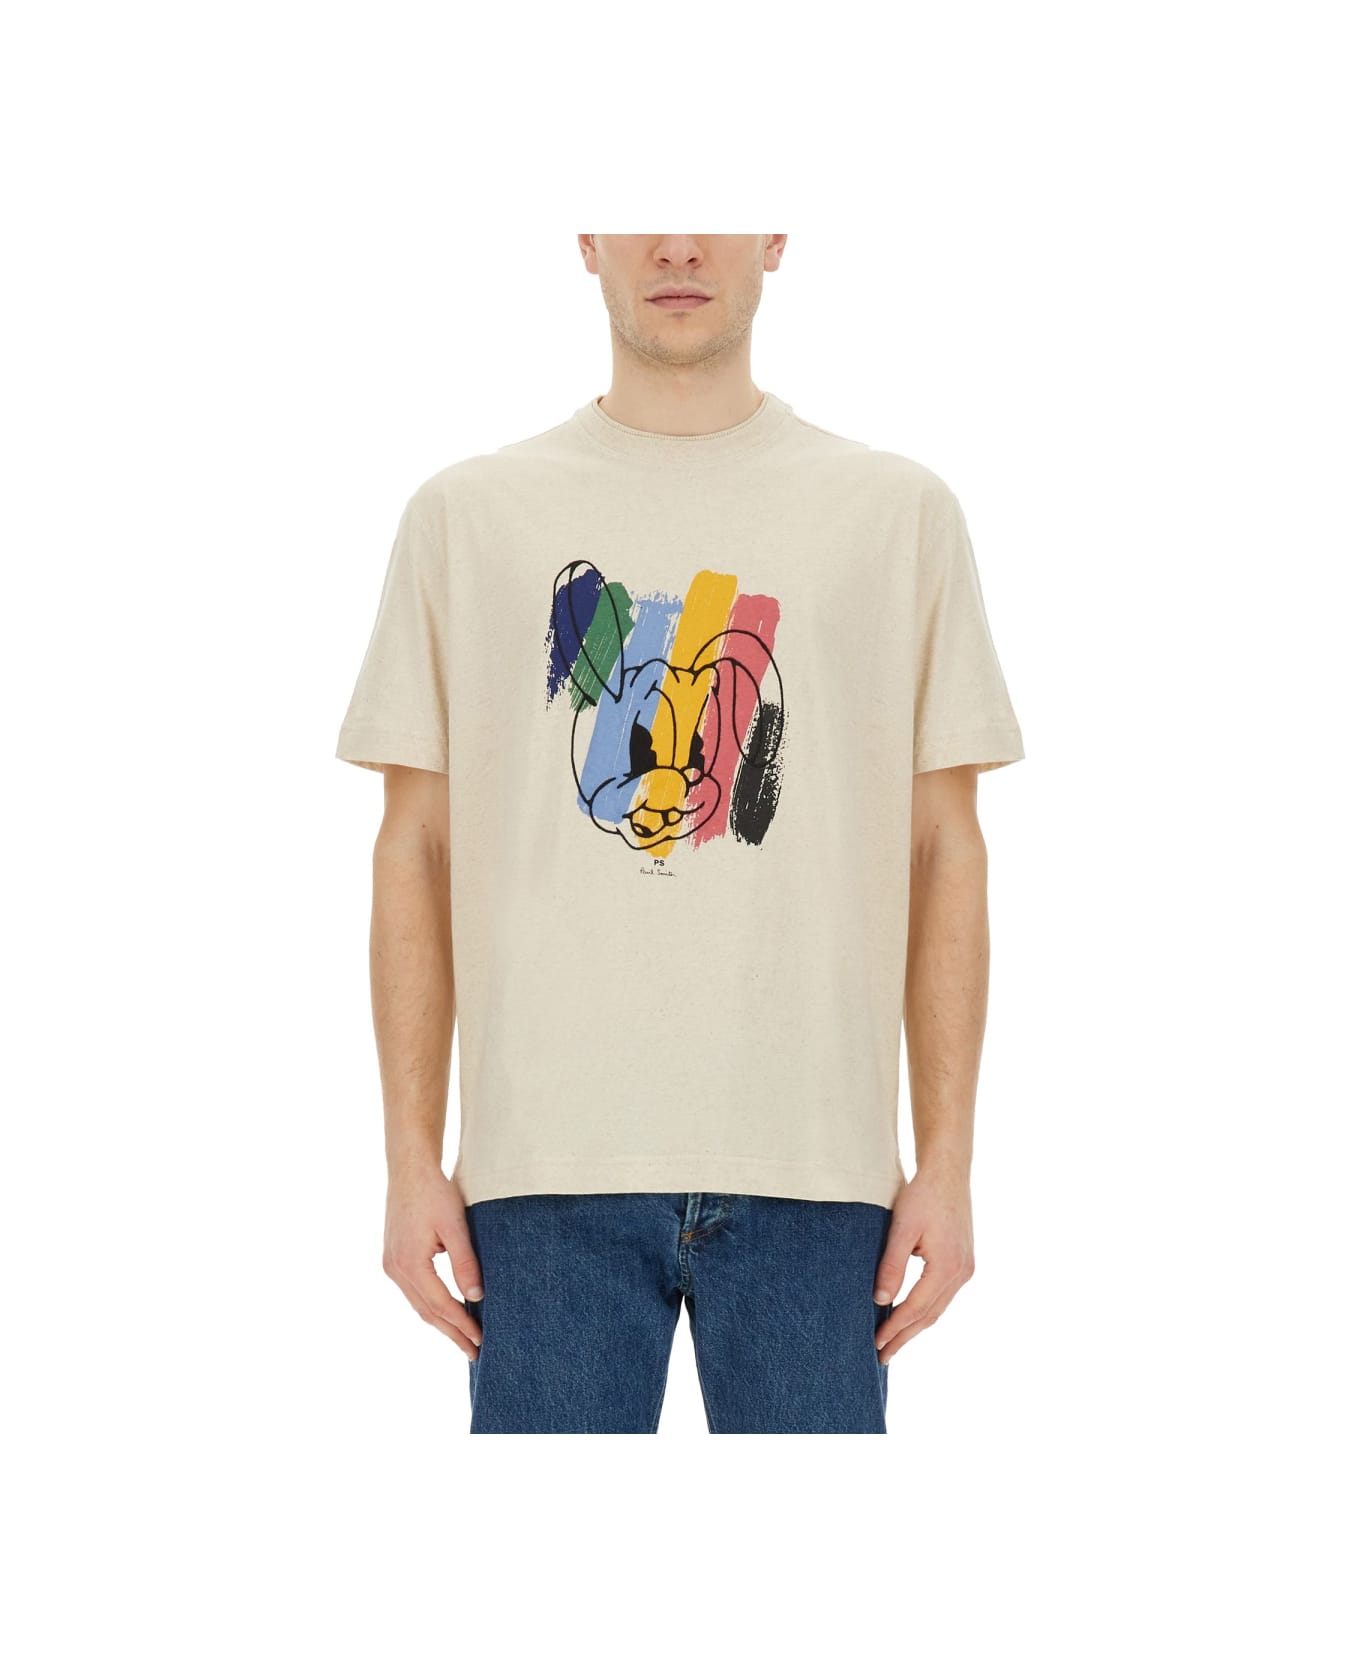 PS by Paul Smith "rabbit" T-shirt - BEIGE シャツ